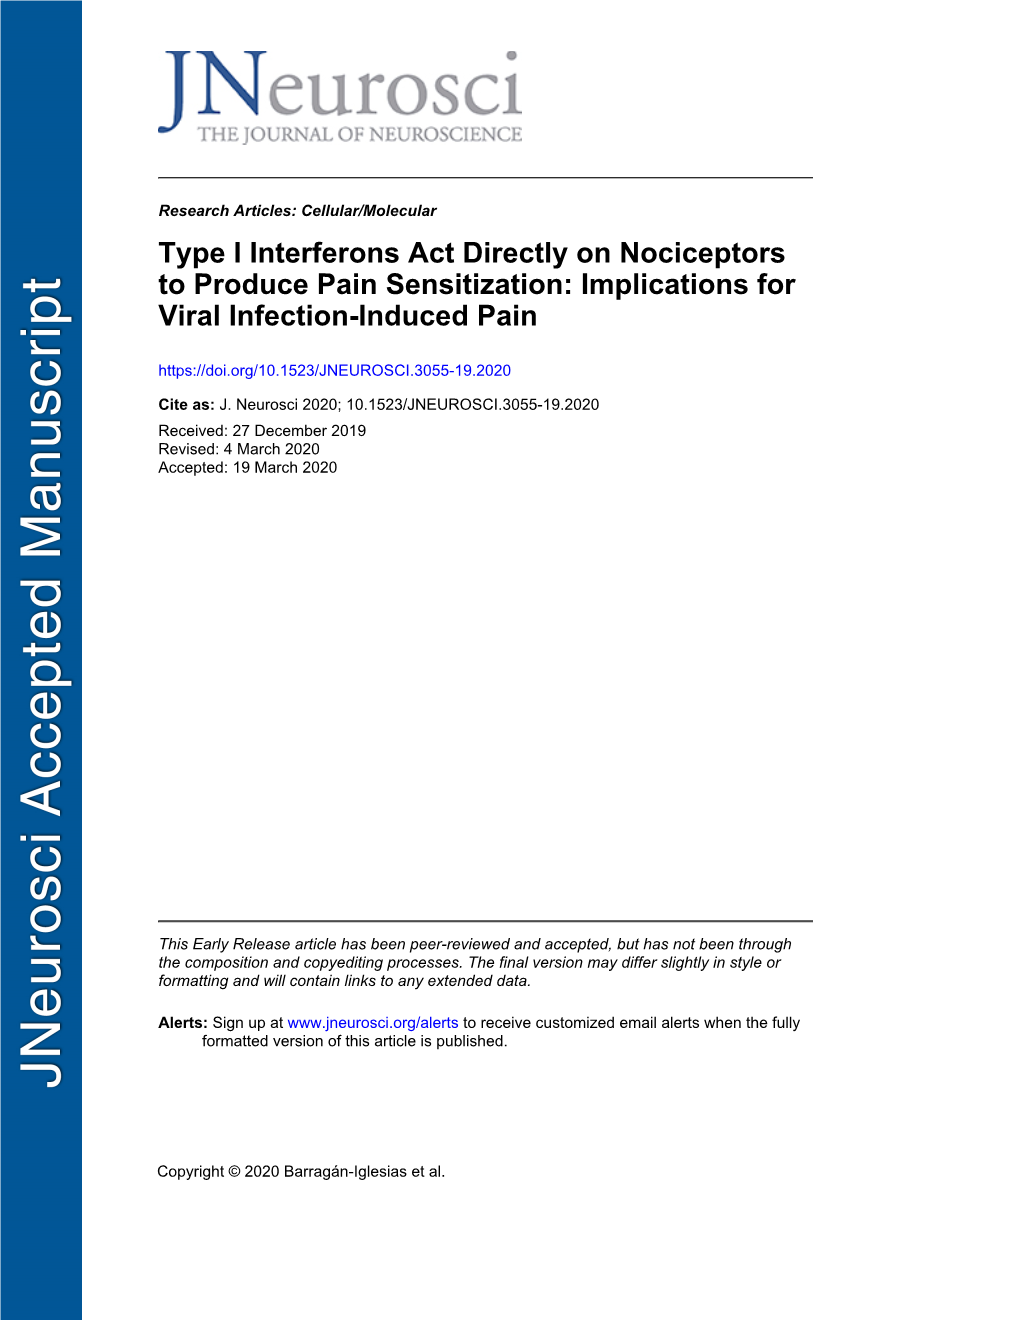 Type I Interferons Act Directly on Nociceptors to Produce Pain